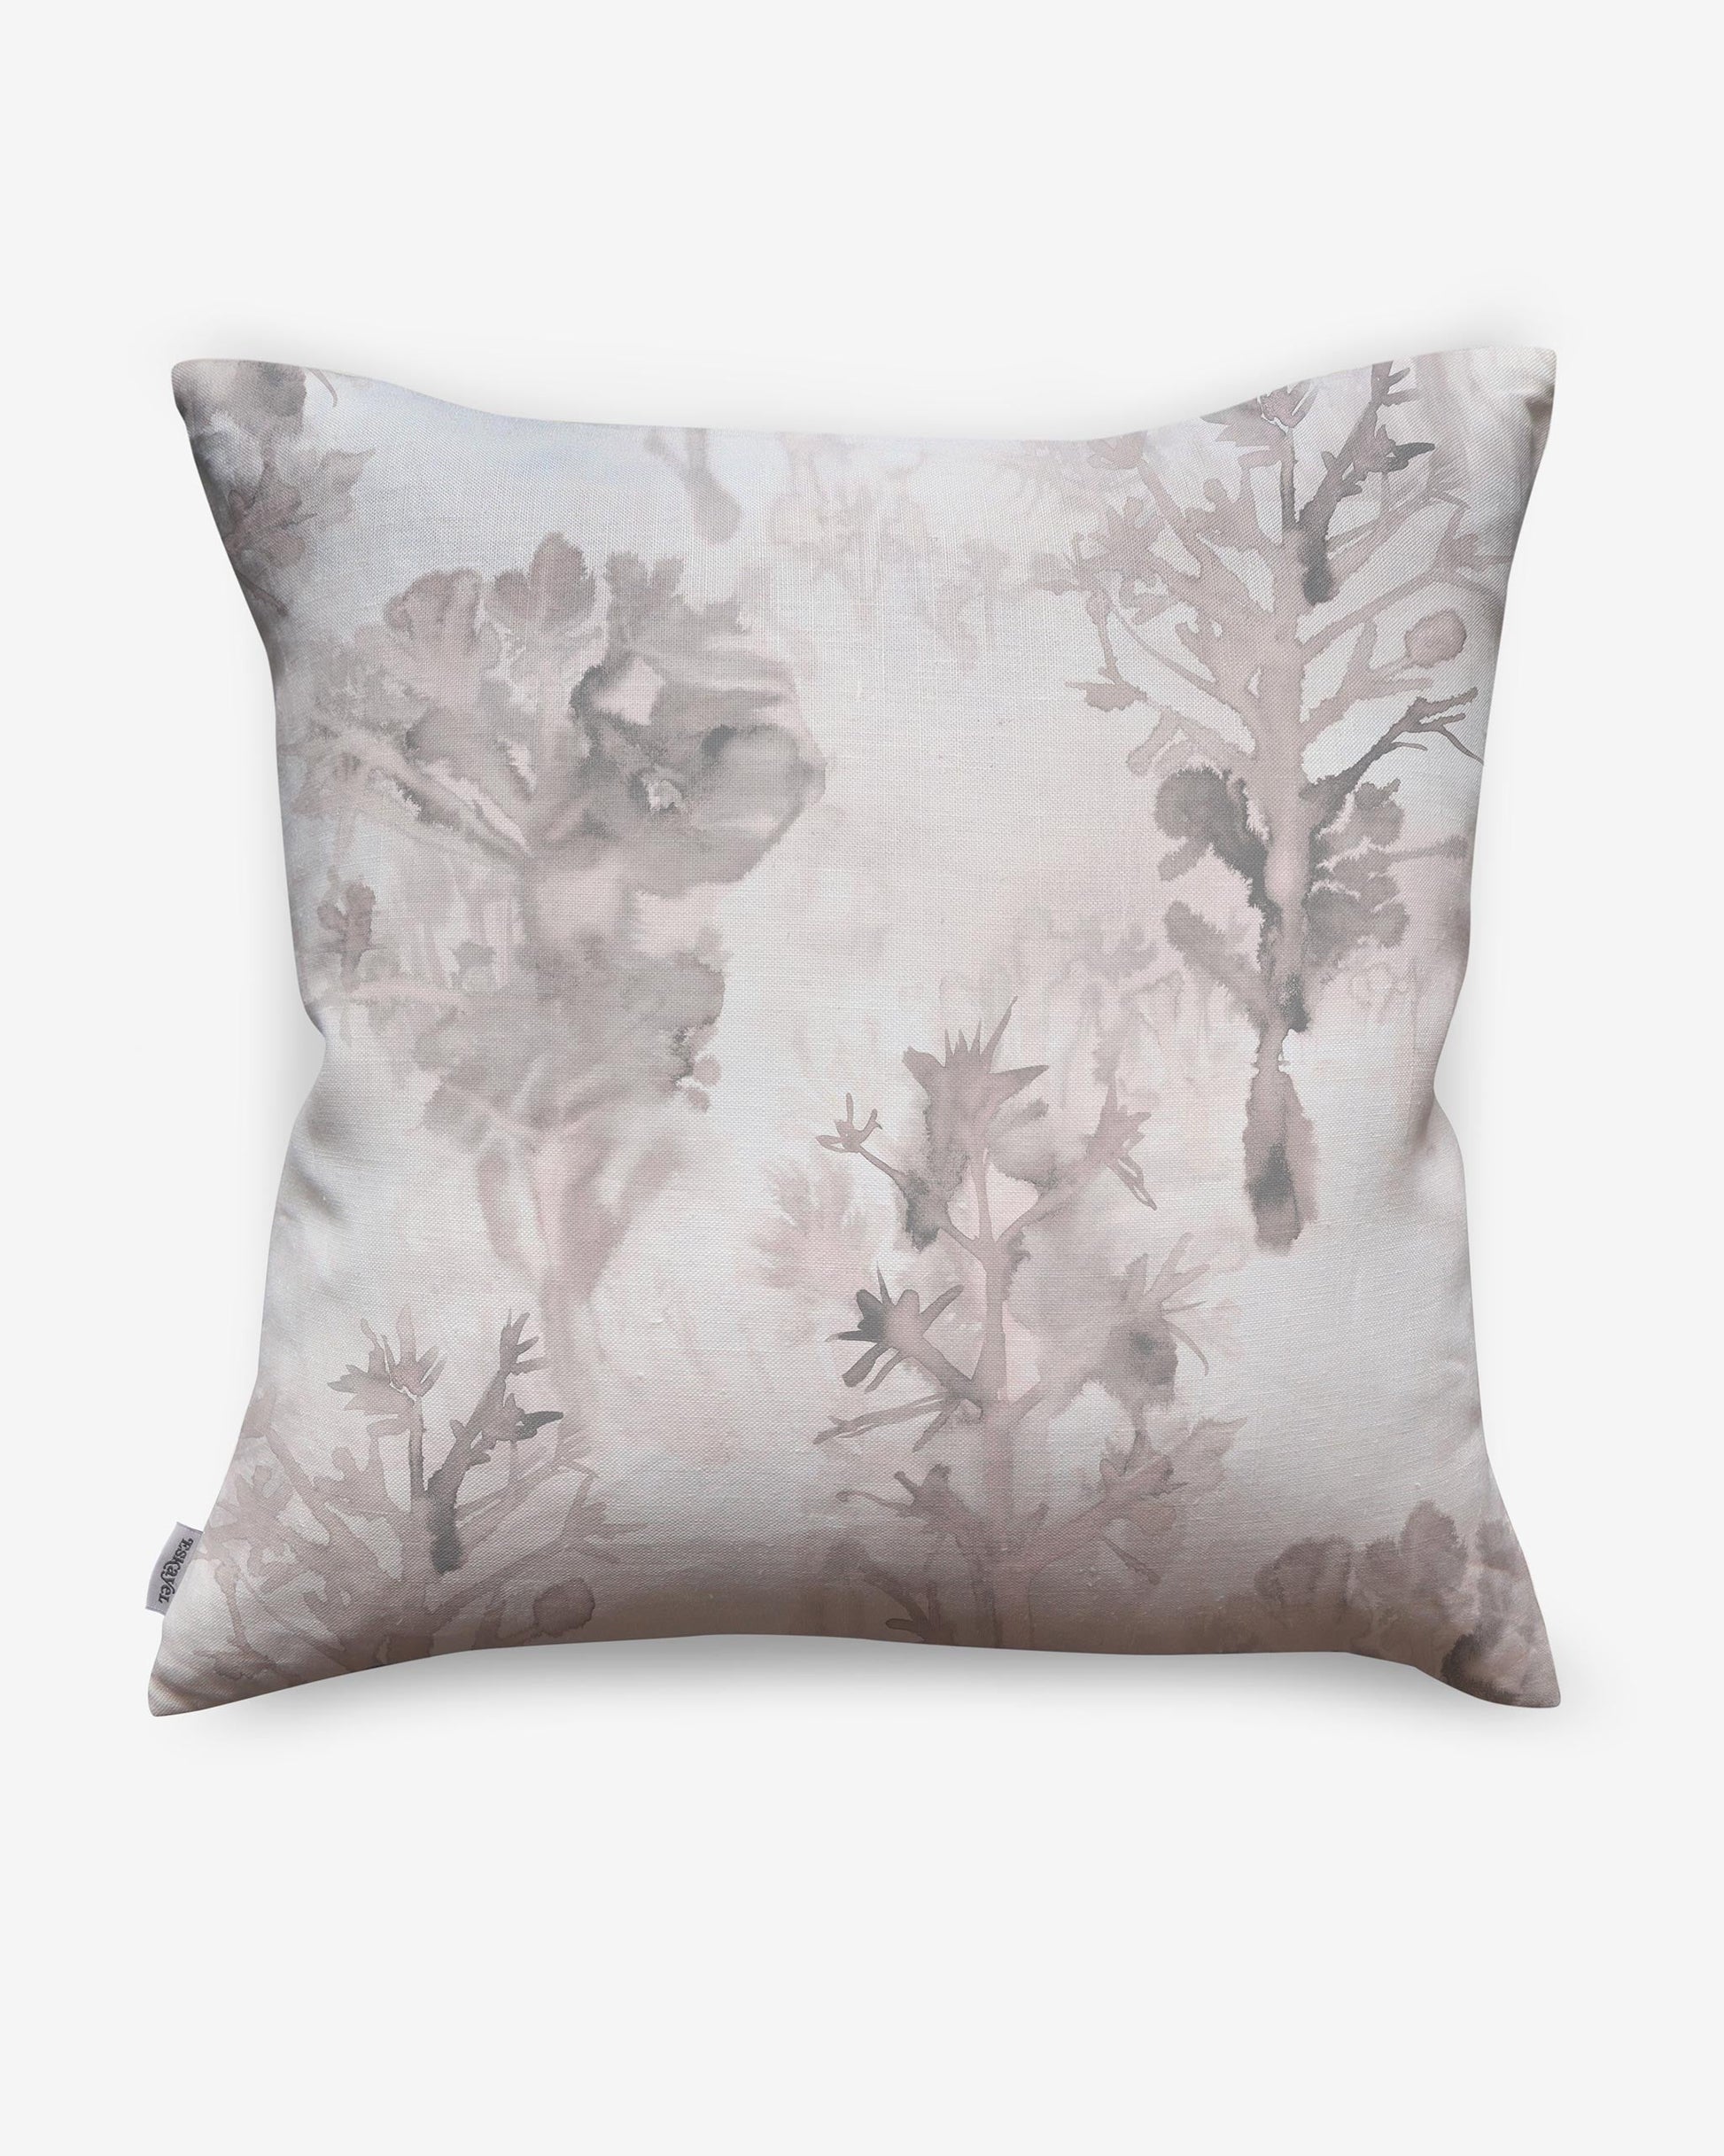 A luxury Aionas Pillow with a pink and white tree print